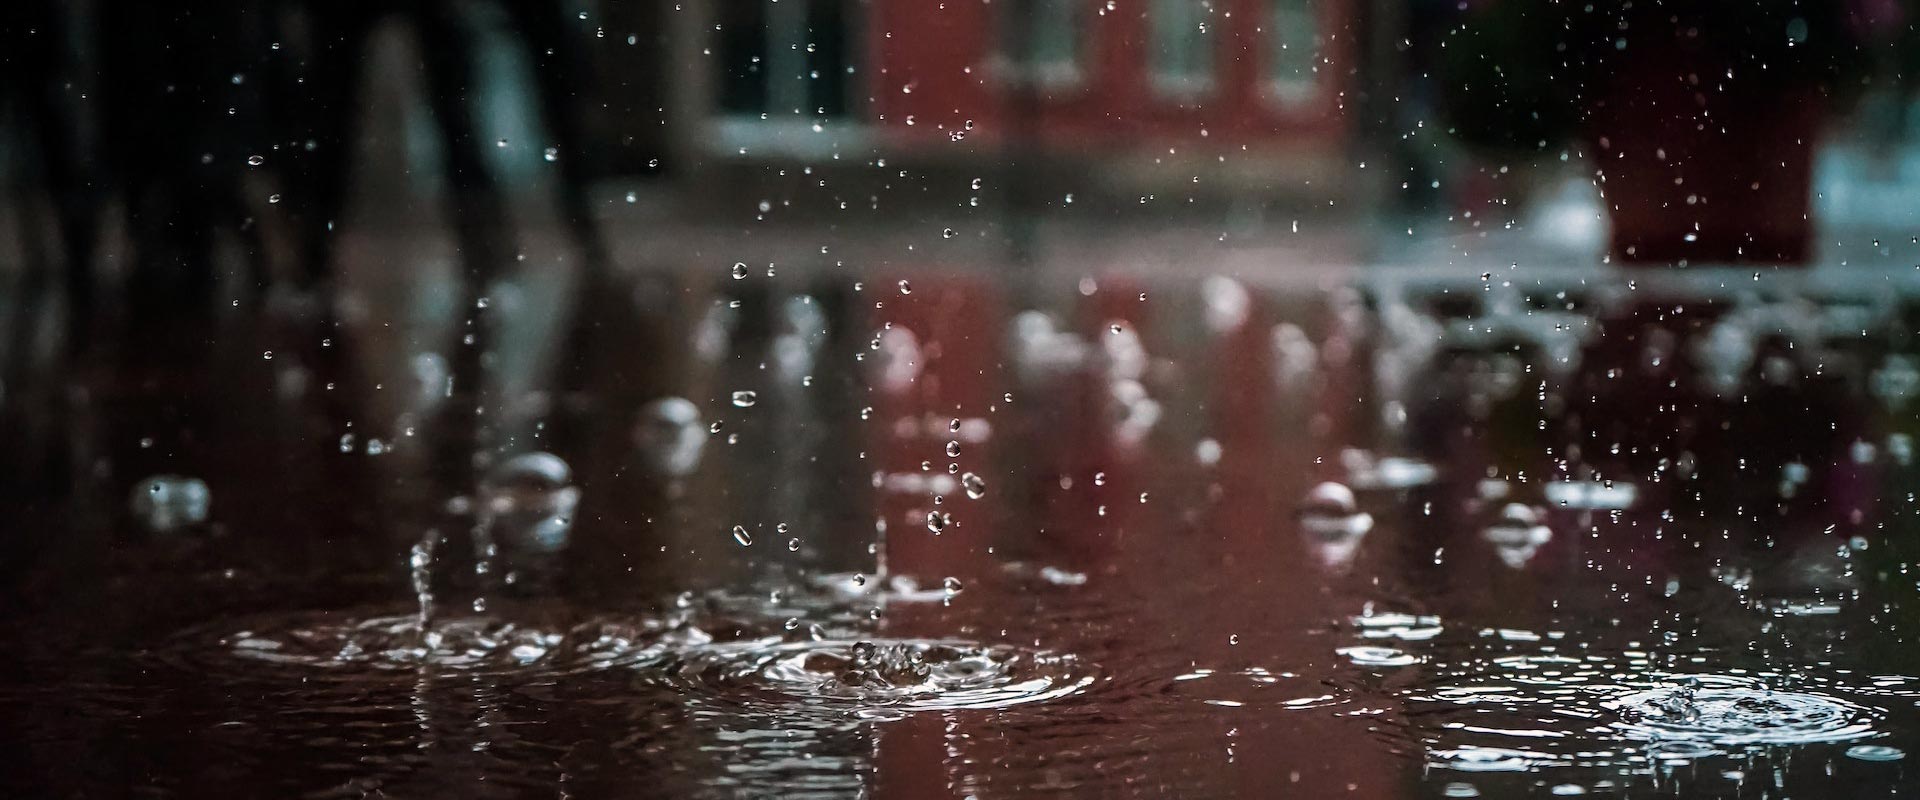 A close-up photo of rain and puddles in a city street.